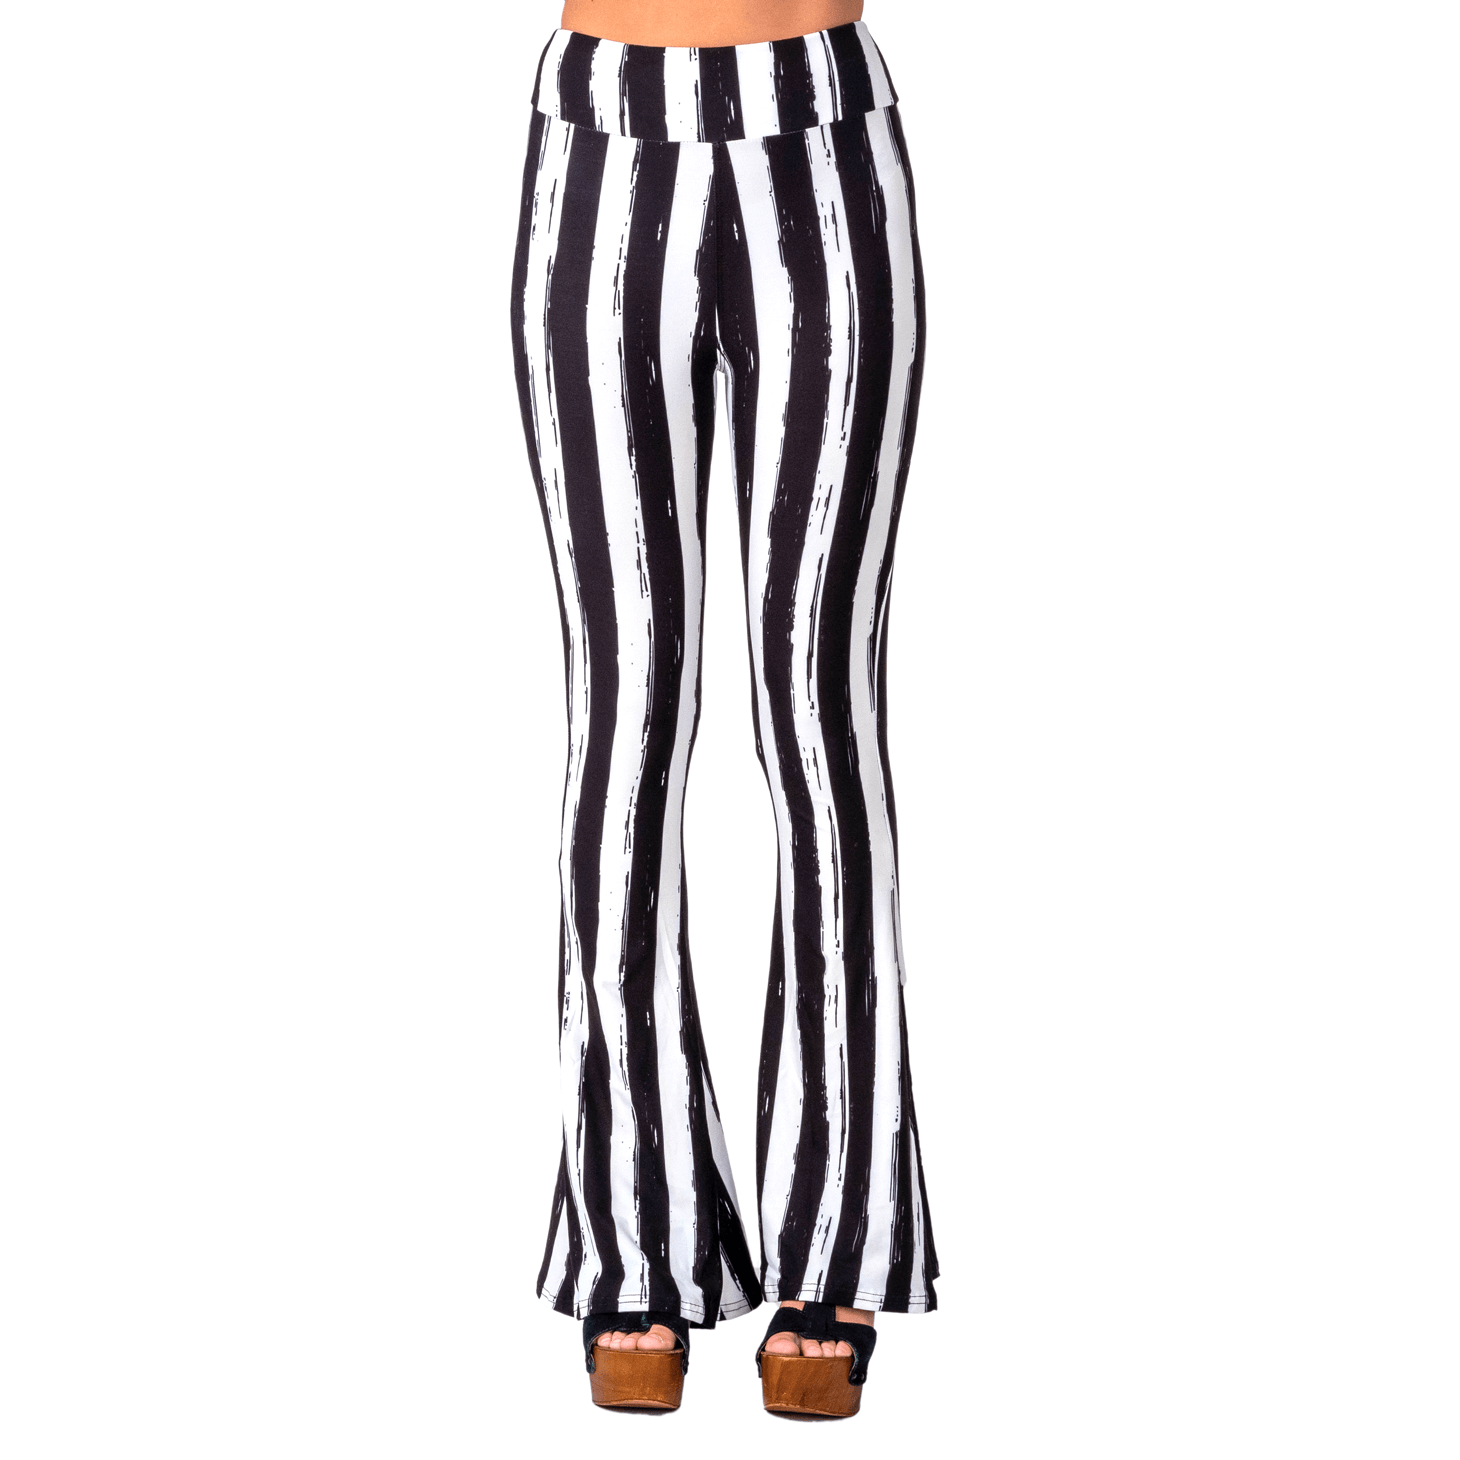 Too Fast | Hellz Bellz Flares | Distressed Black &amp; White Striped